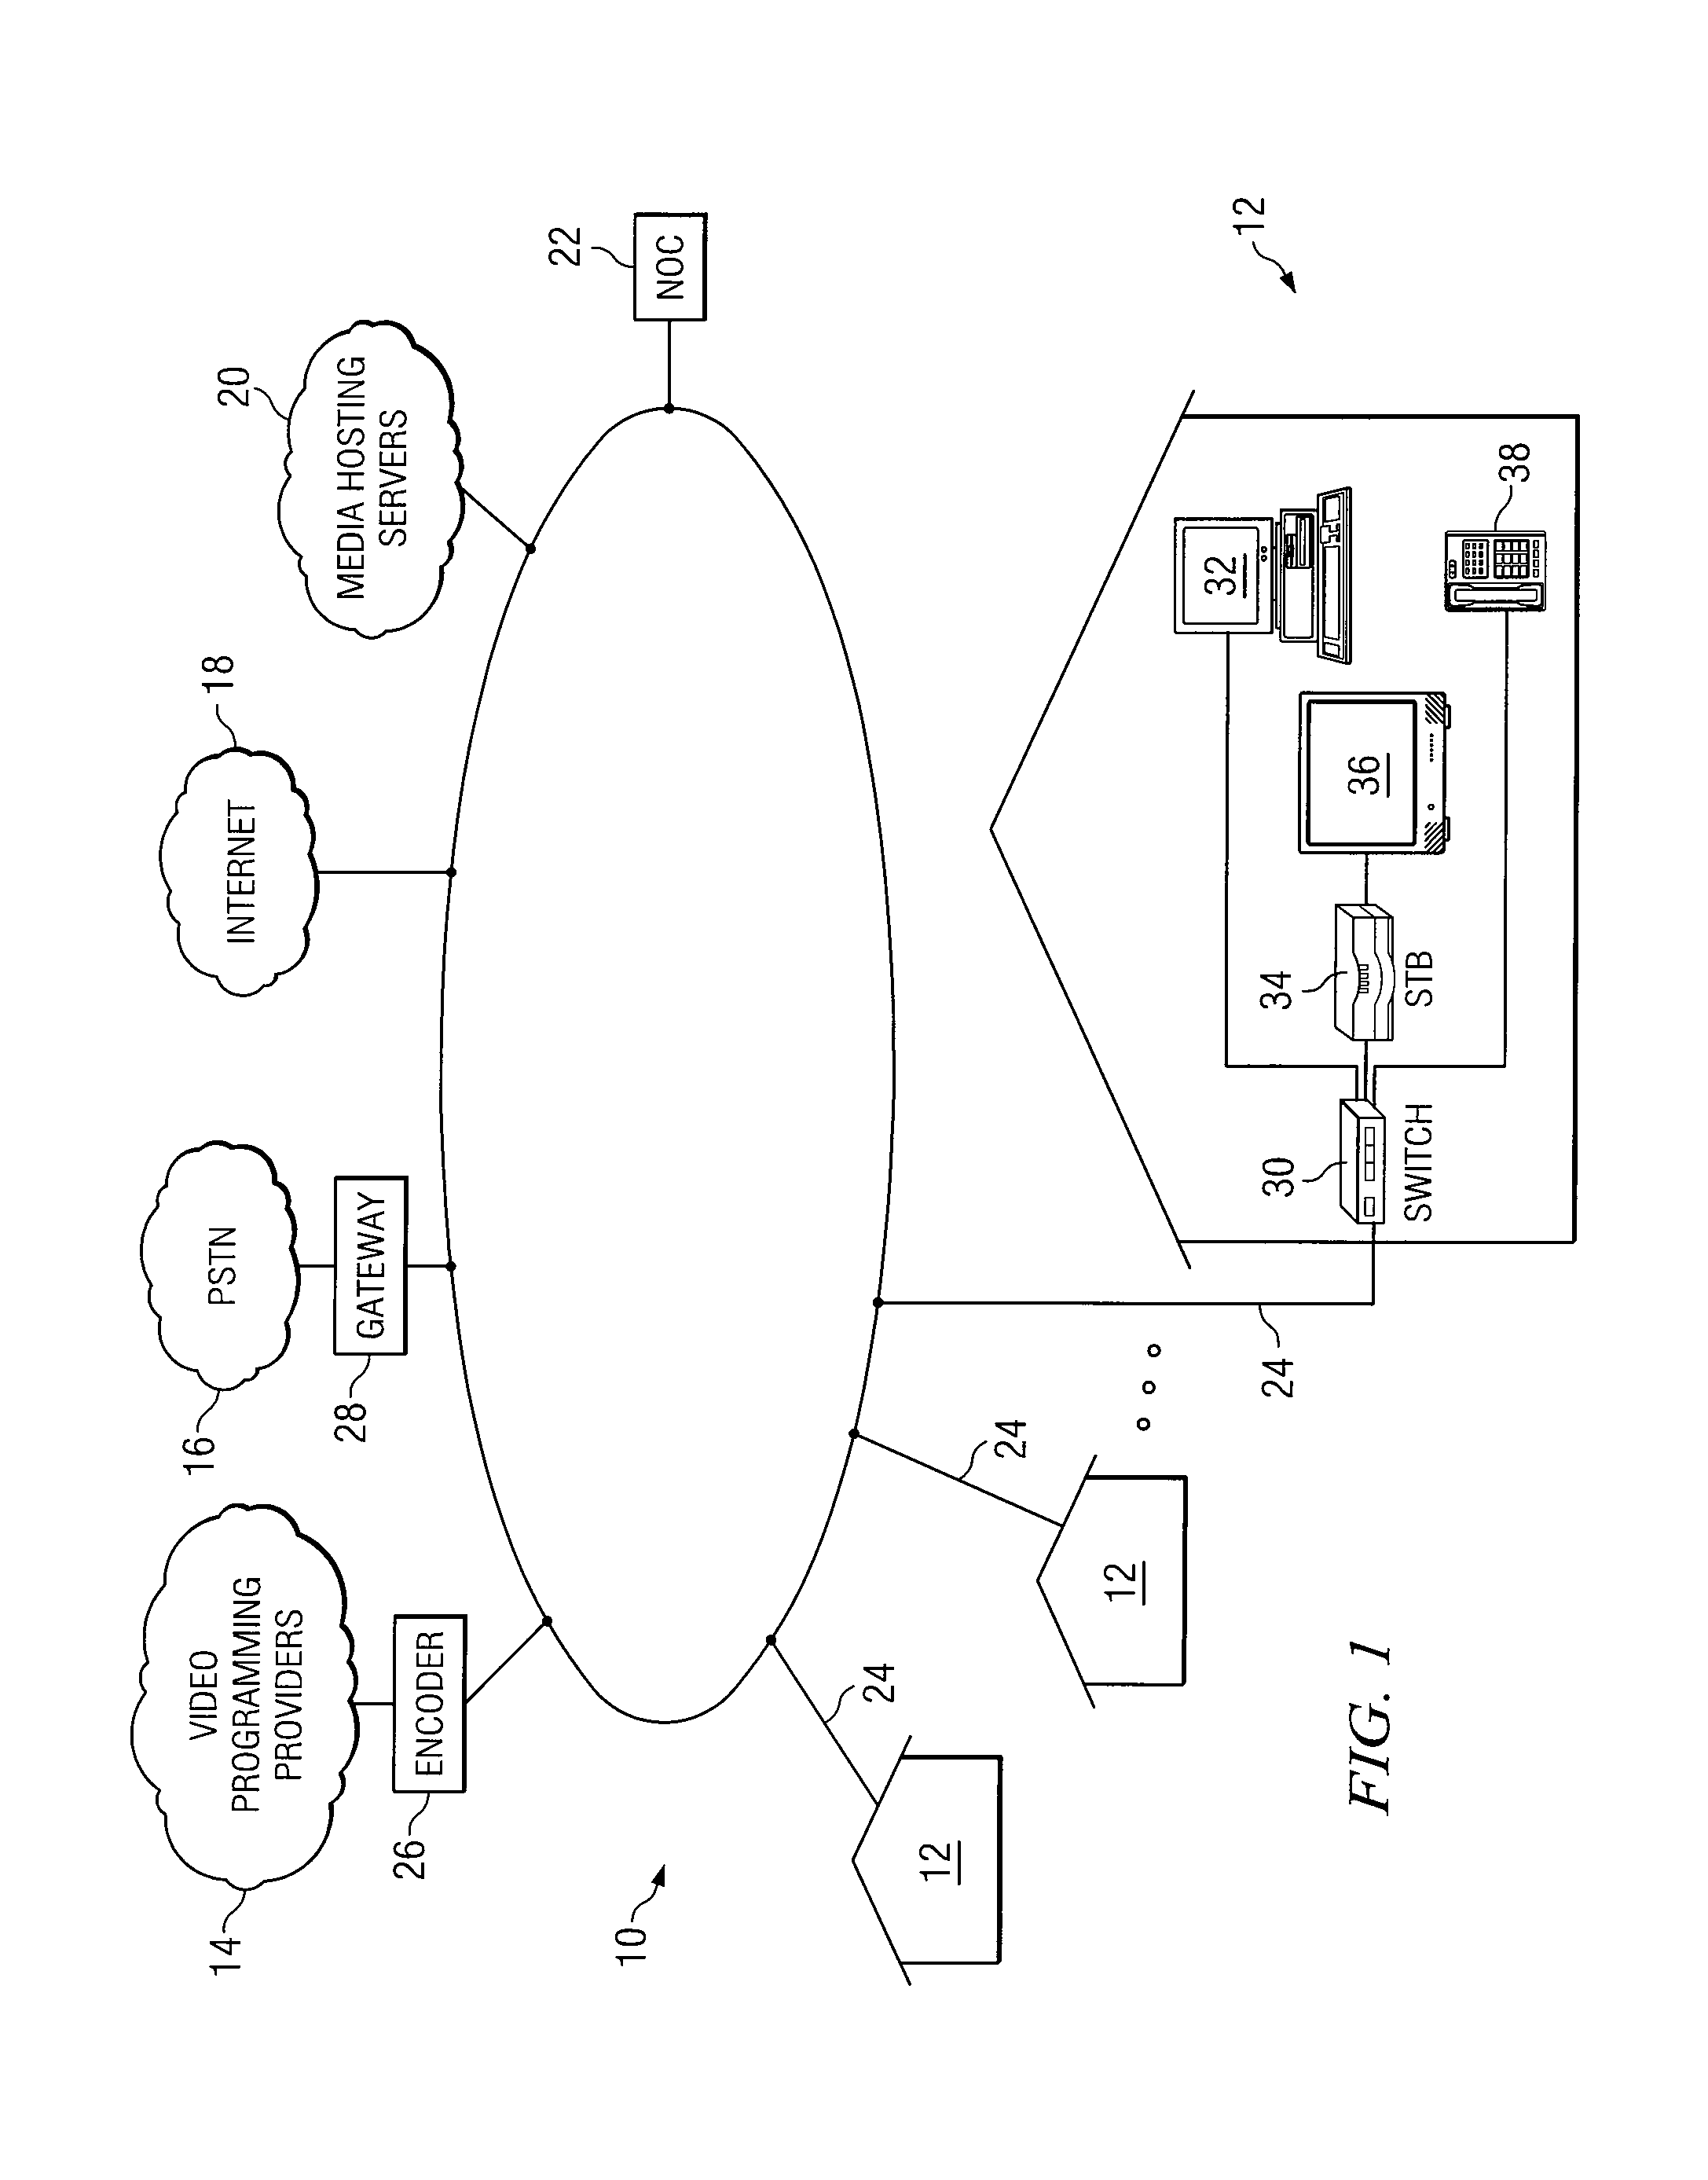 System and method for providing integrated voice, video and data to customer premises over a single network